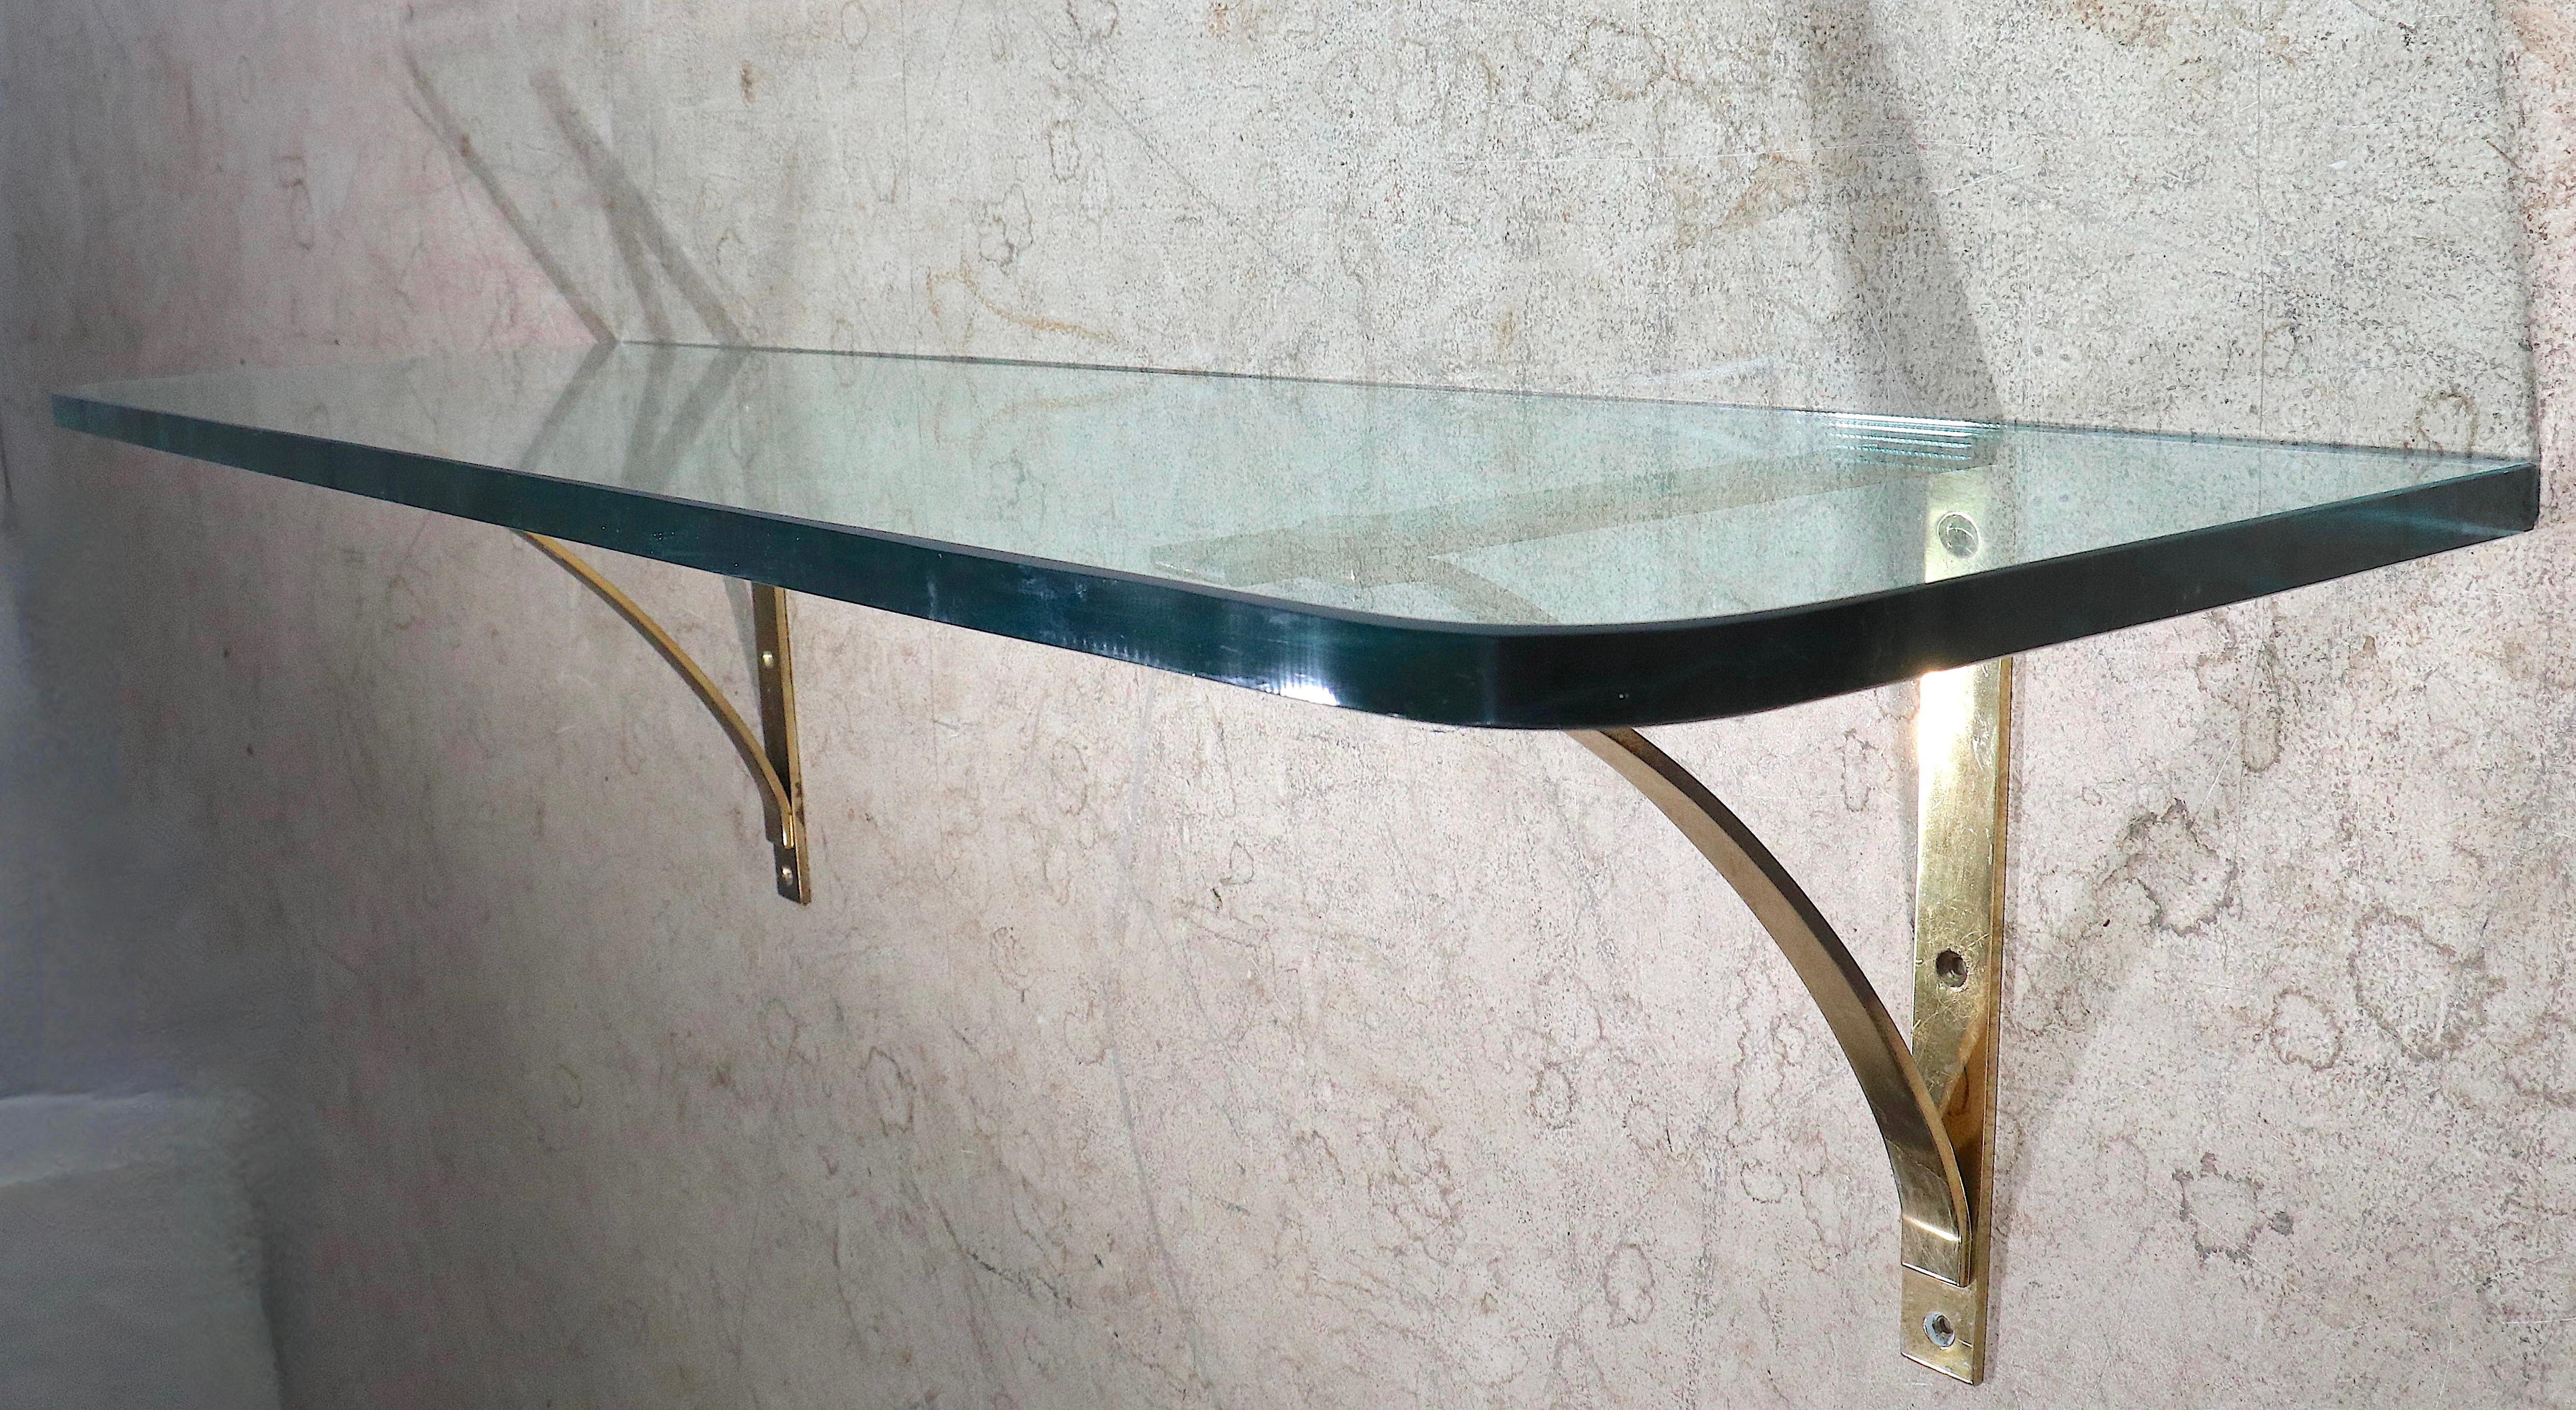 Post Modern Plate Glass and Brass Wall Mount Shelf, C. 1970's For Sale 3